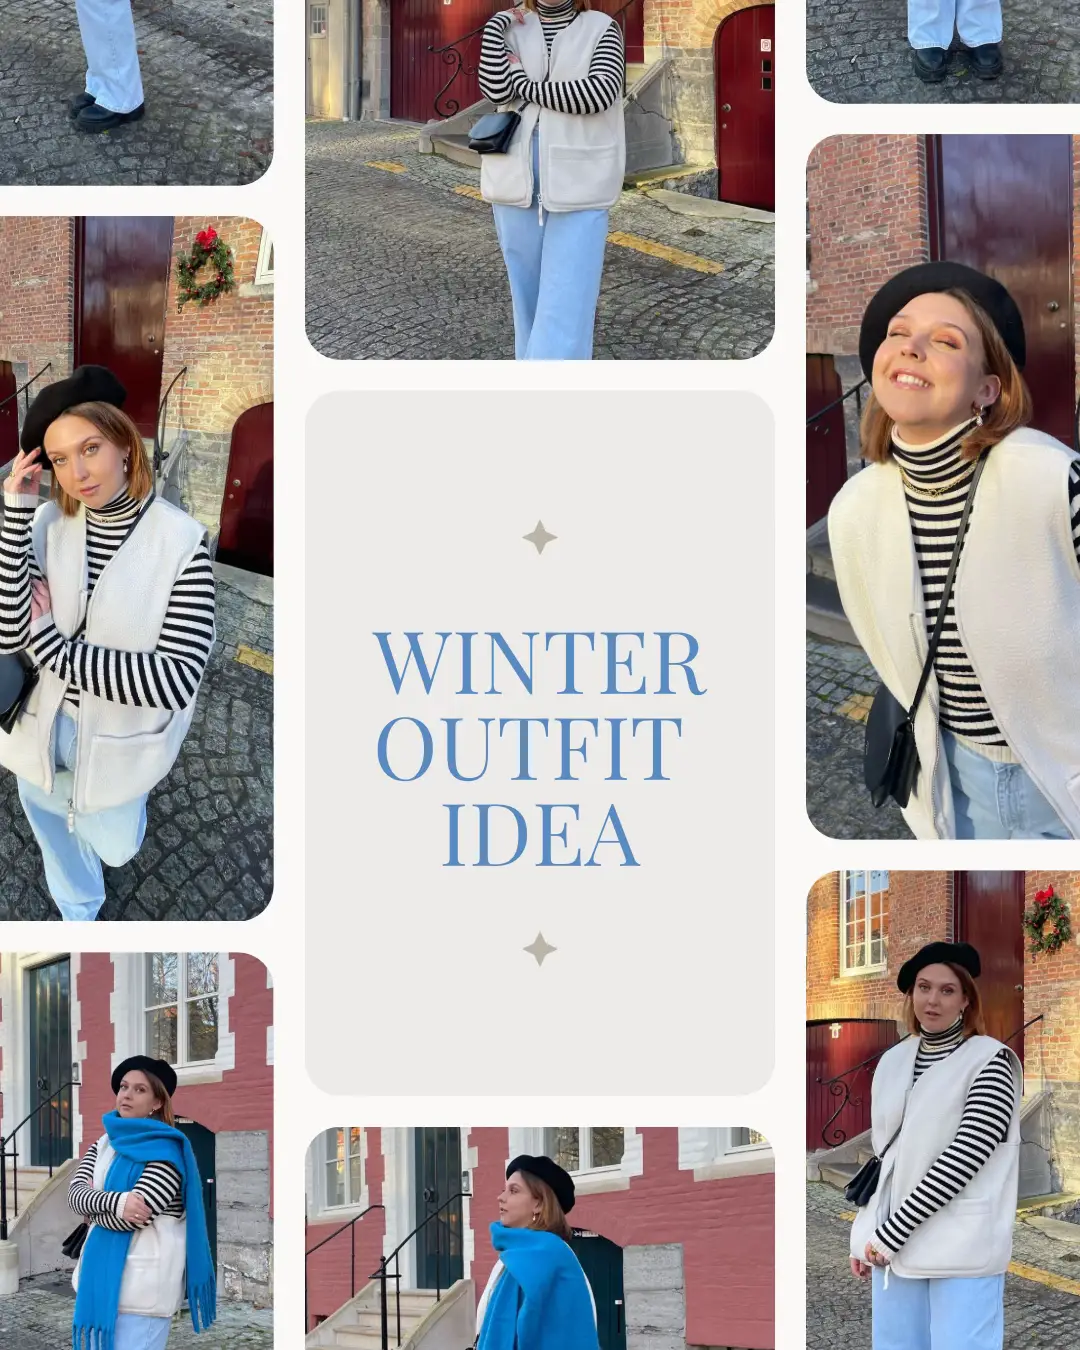 17 winter outfit ideas for the office #winteroutfit